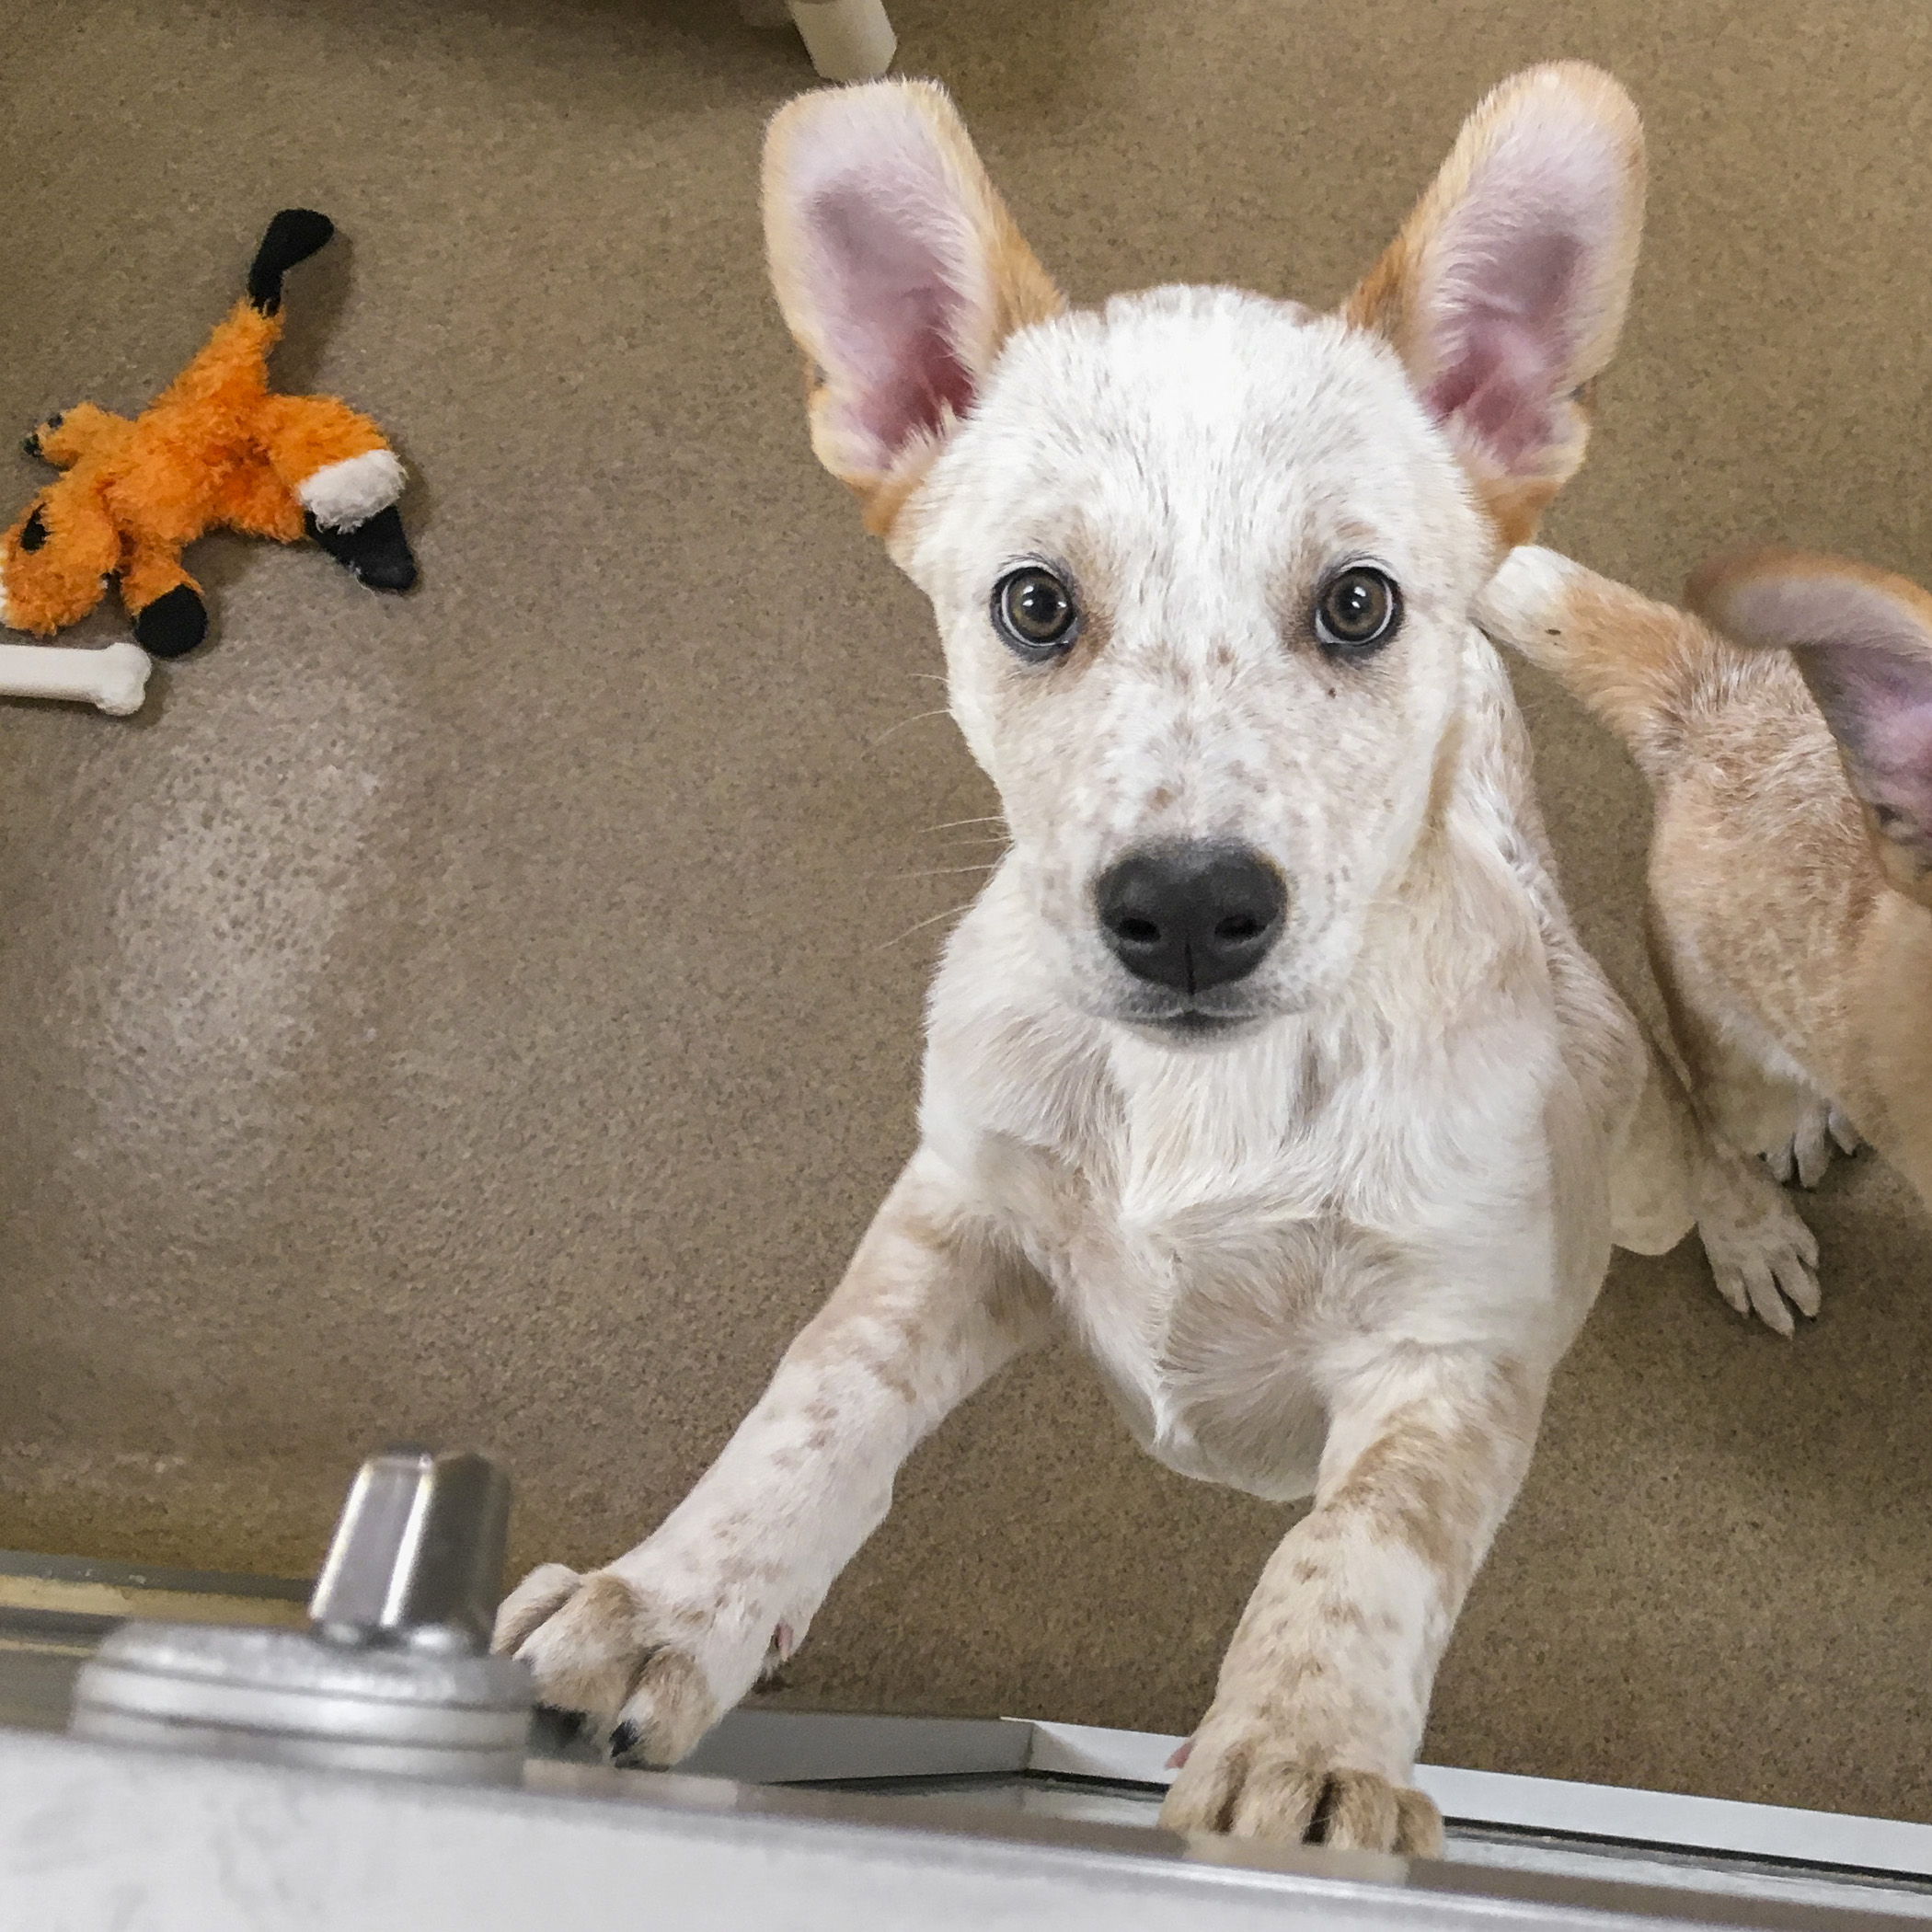  It’s a darn good thing, Olaf already has a pending adoption…as soon as the kid’s been neutered…because boy does he know how to work those puppy eyes! 